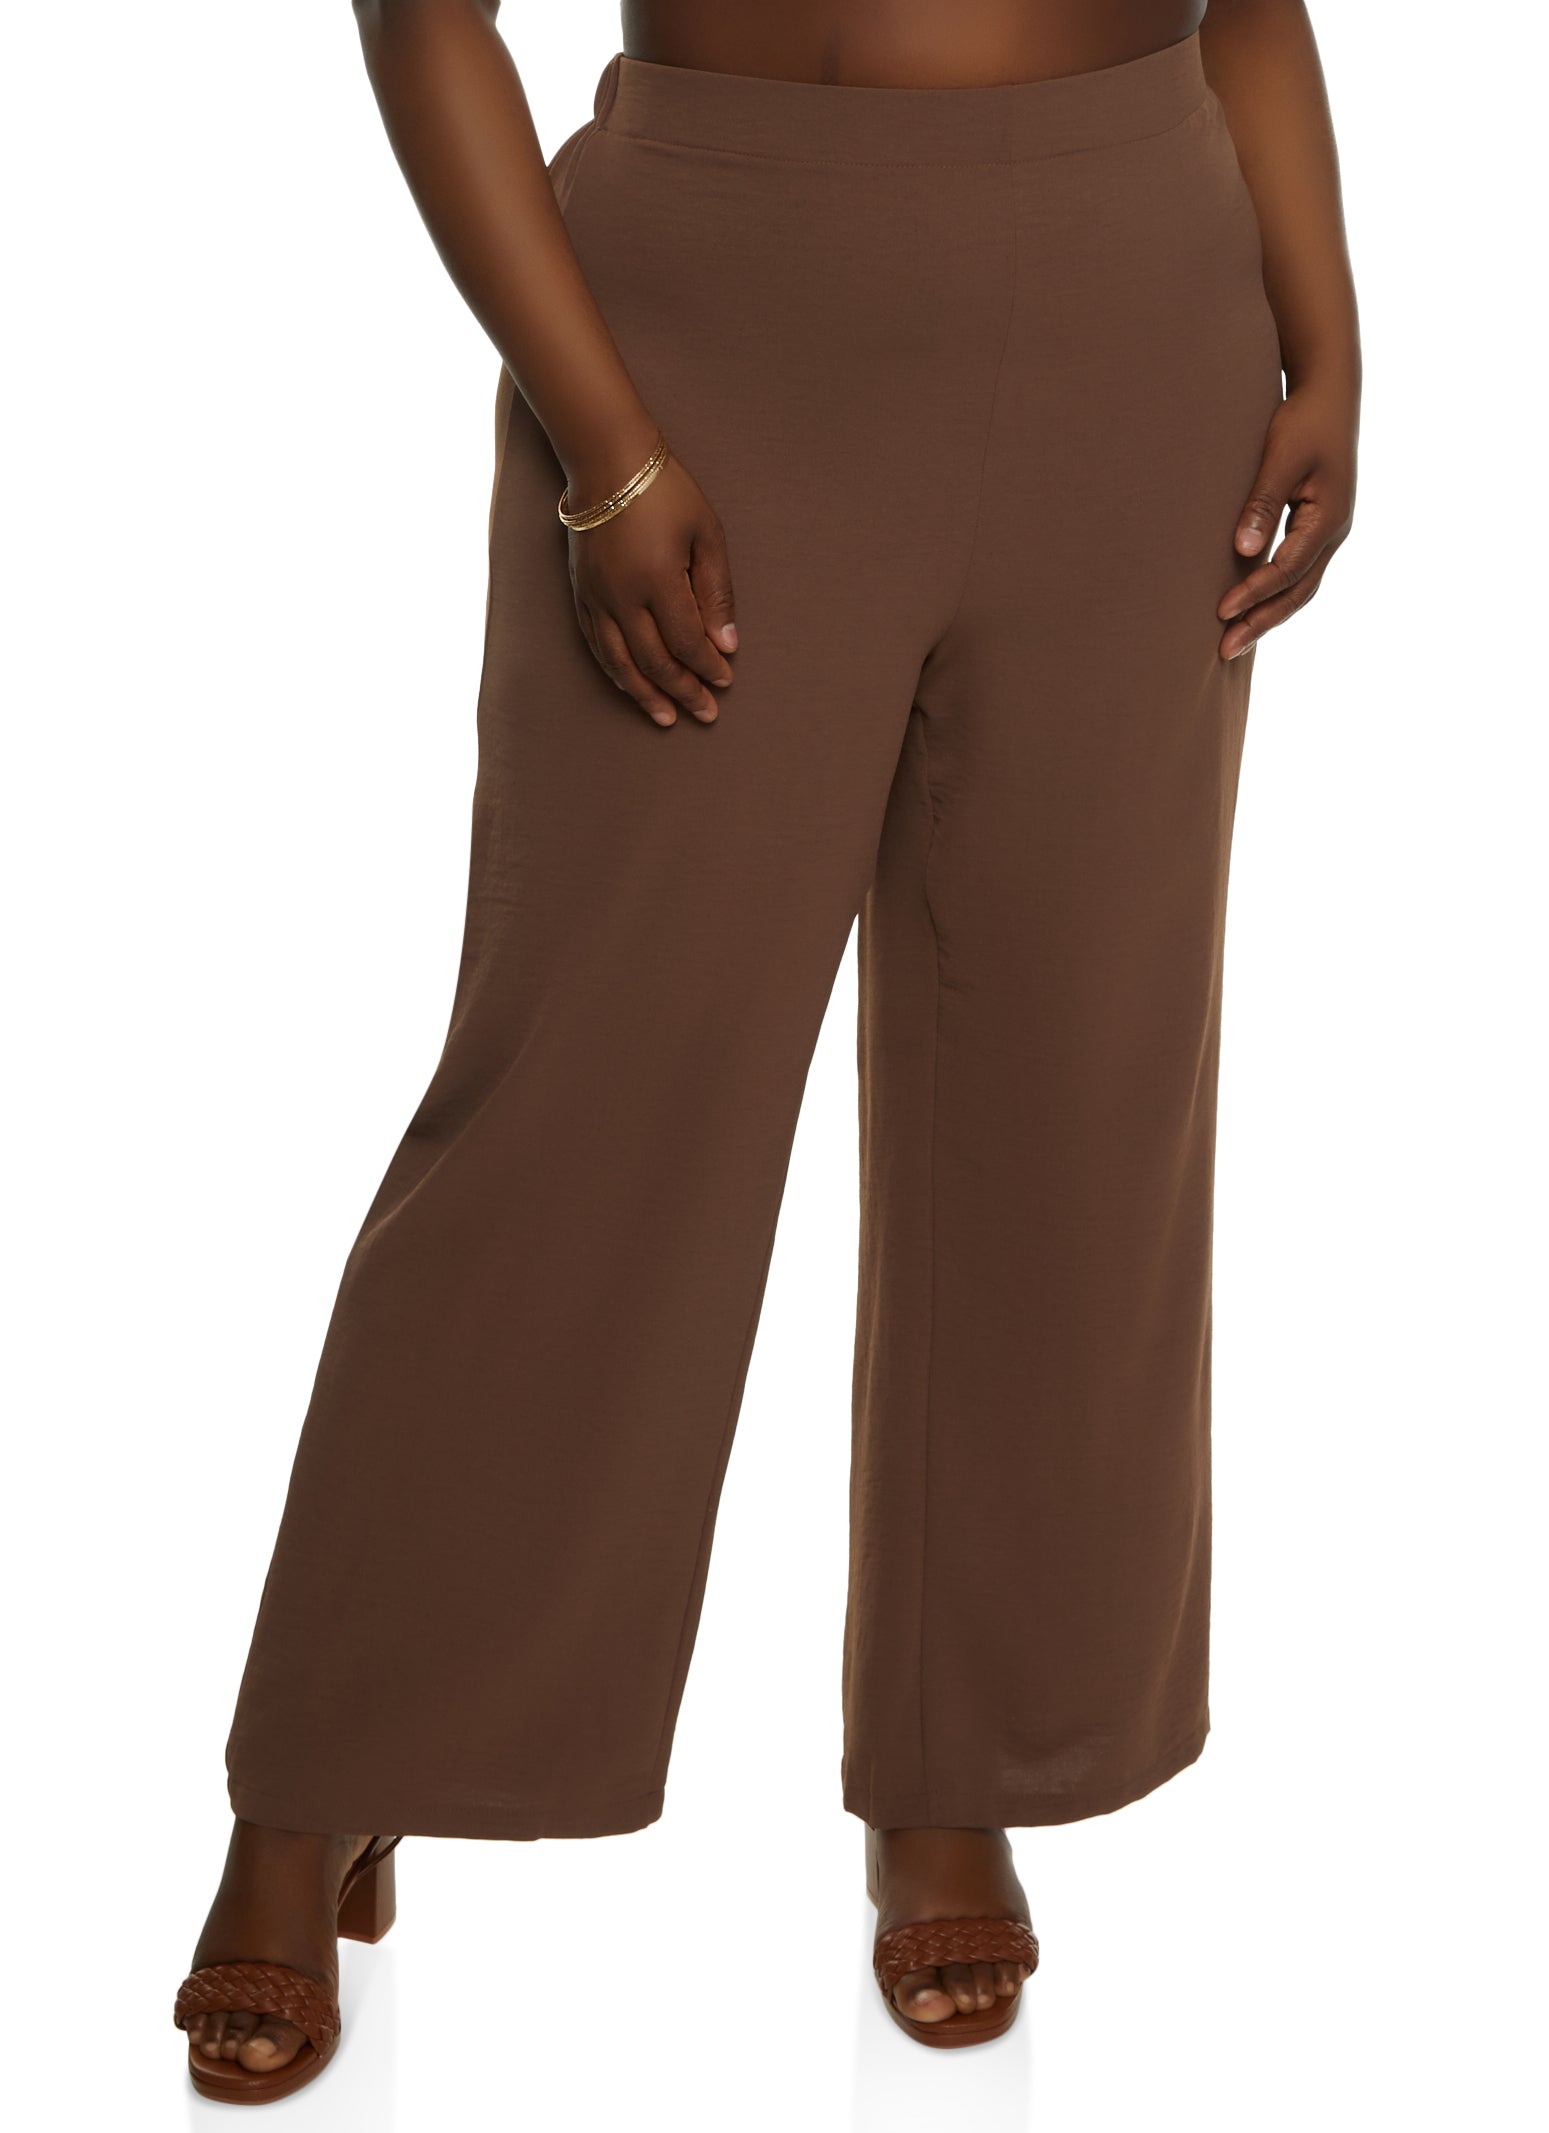 Plus Size Wide Leg Pants, Everyday Low Prices